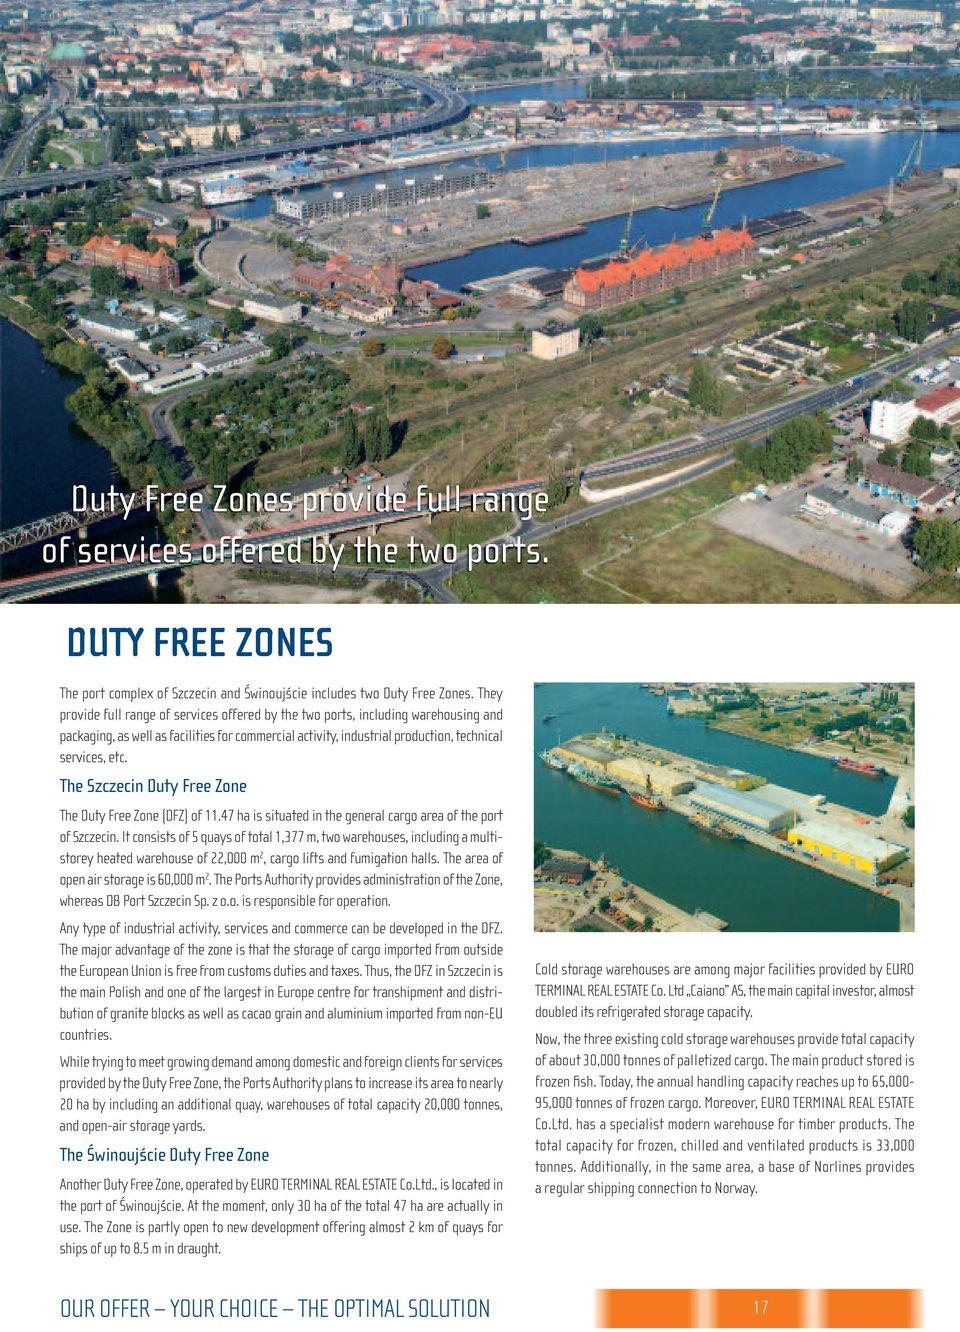 The Szczecin Duty Free zone The Duty Free Zone (DFZ) of 11.47 ha is situated in the general cargo area of the port of Szczecin.